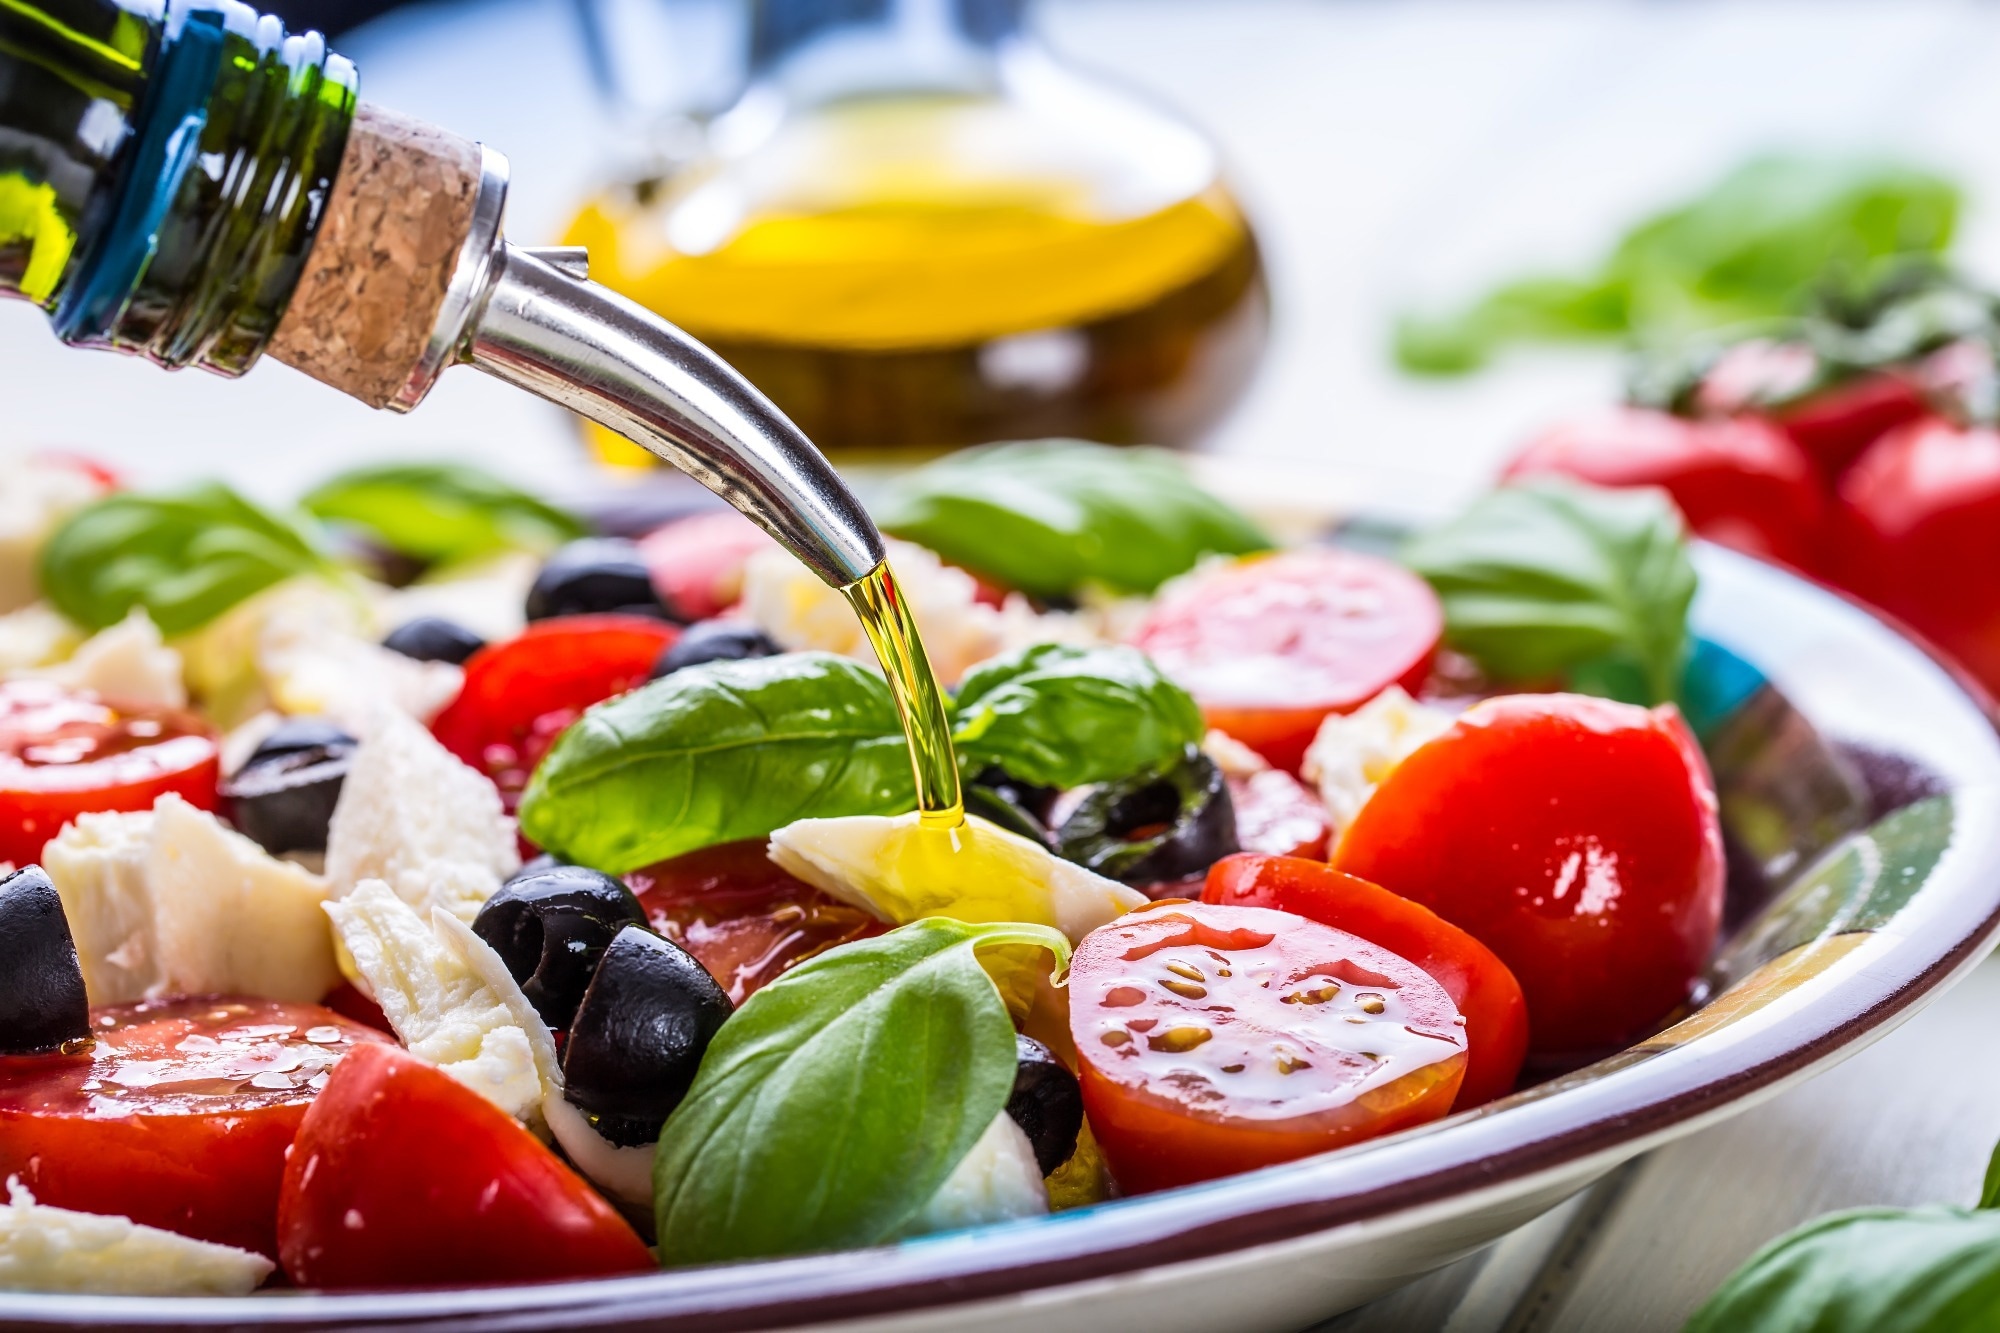 Study: Healthy Eating in the Spanish University Community: A Case Study. Image Credit: MarianWeyo/Shutterstock.com